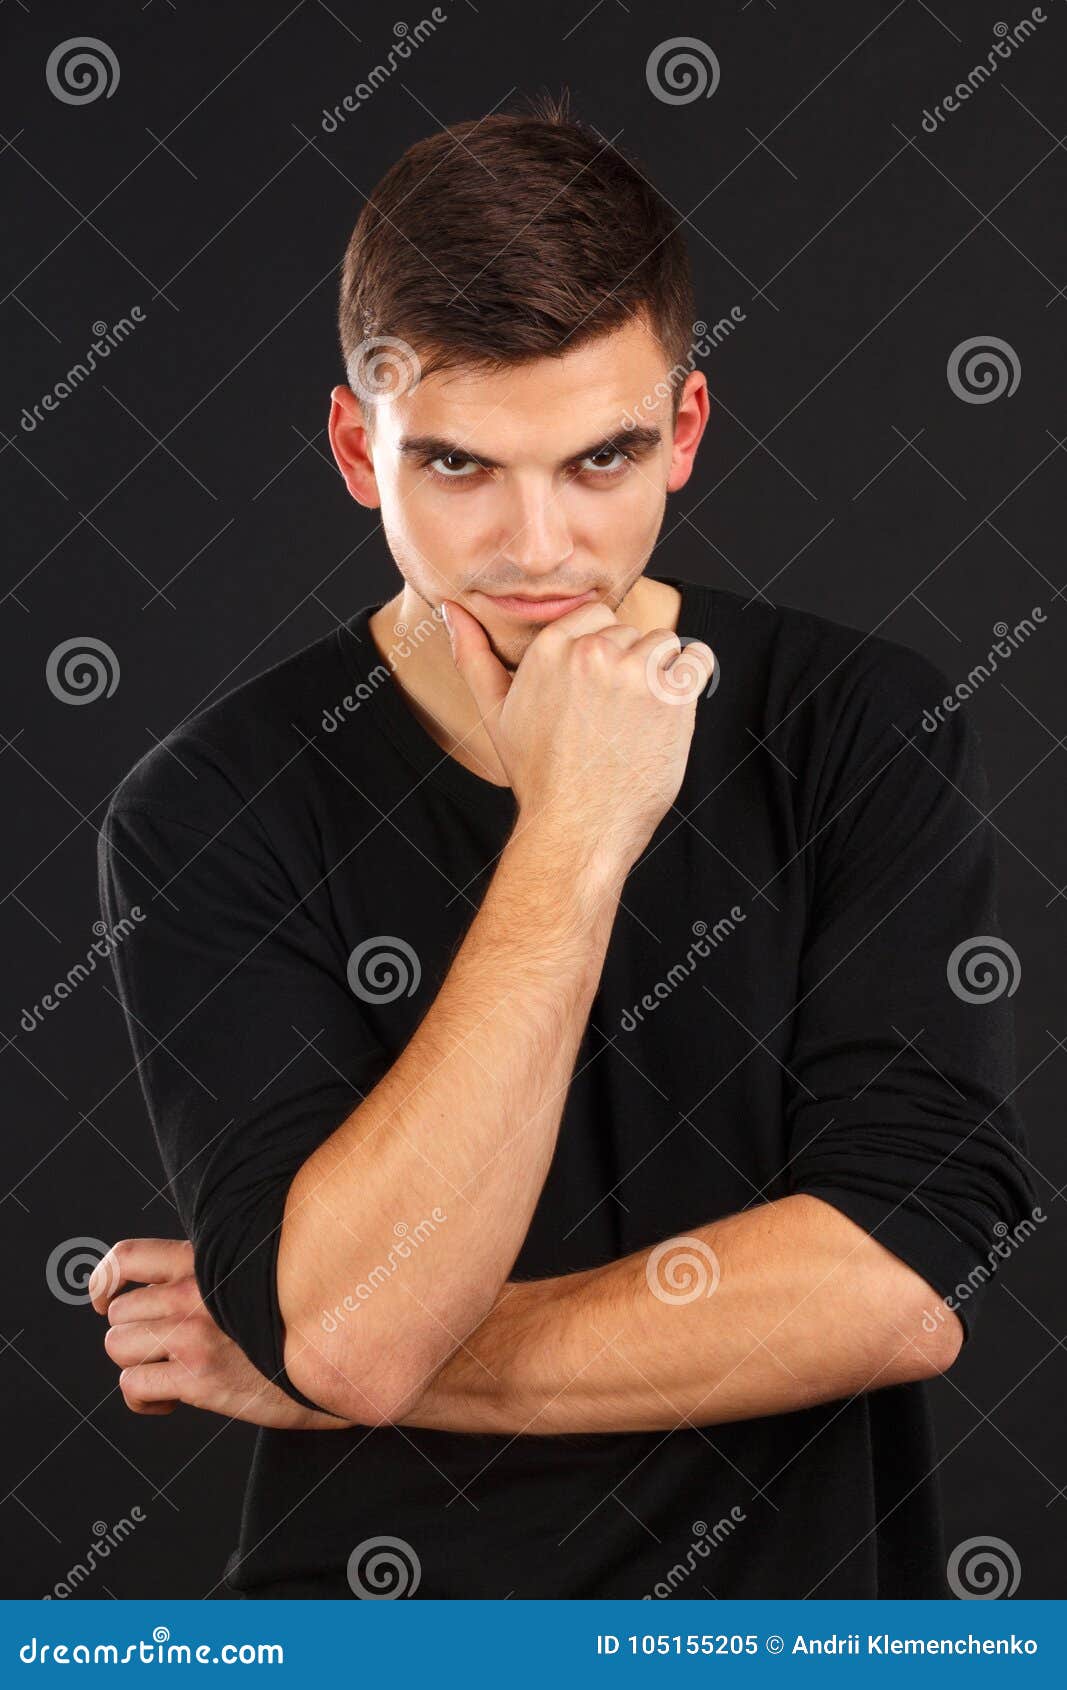 A Young European Guy Poses Holding One Hand Against His Chin Against A Black Background Indoors Stock Image Image Of Look Casual